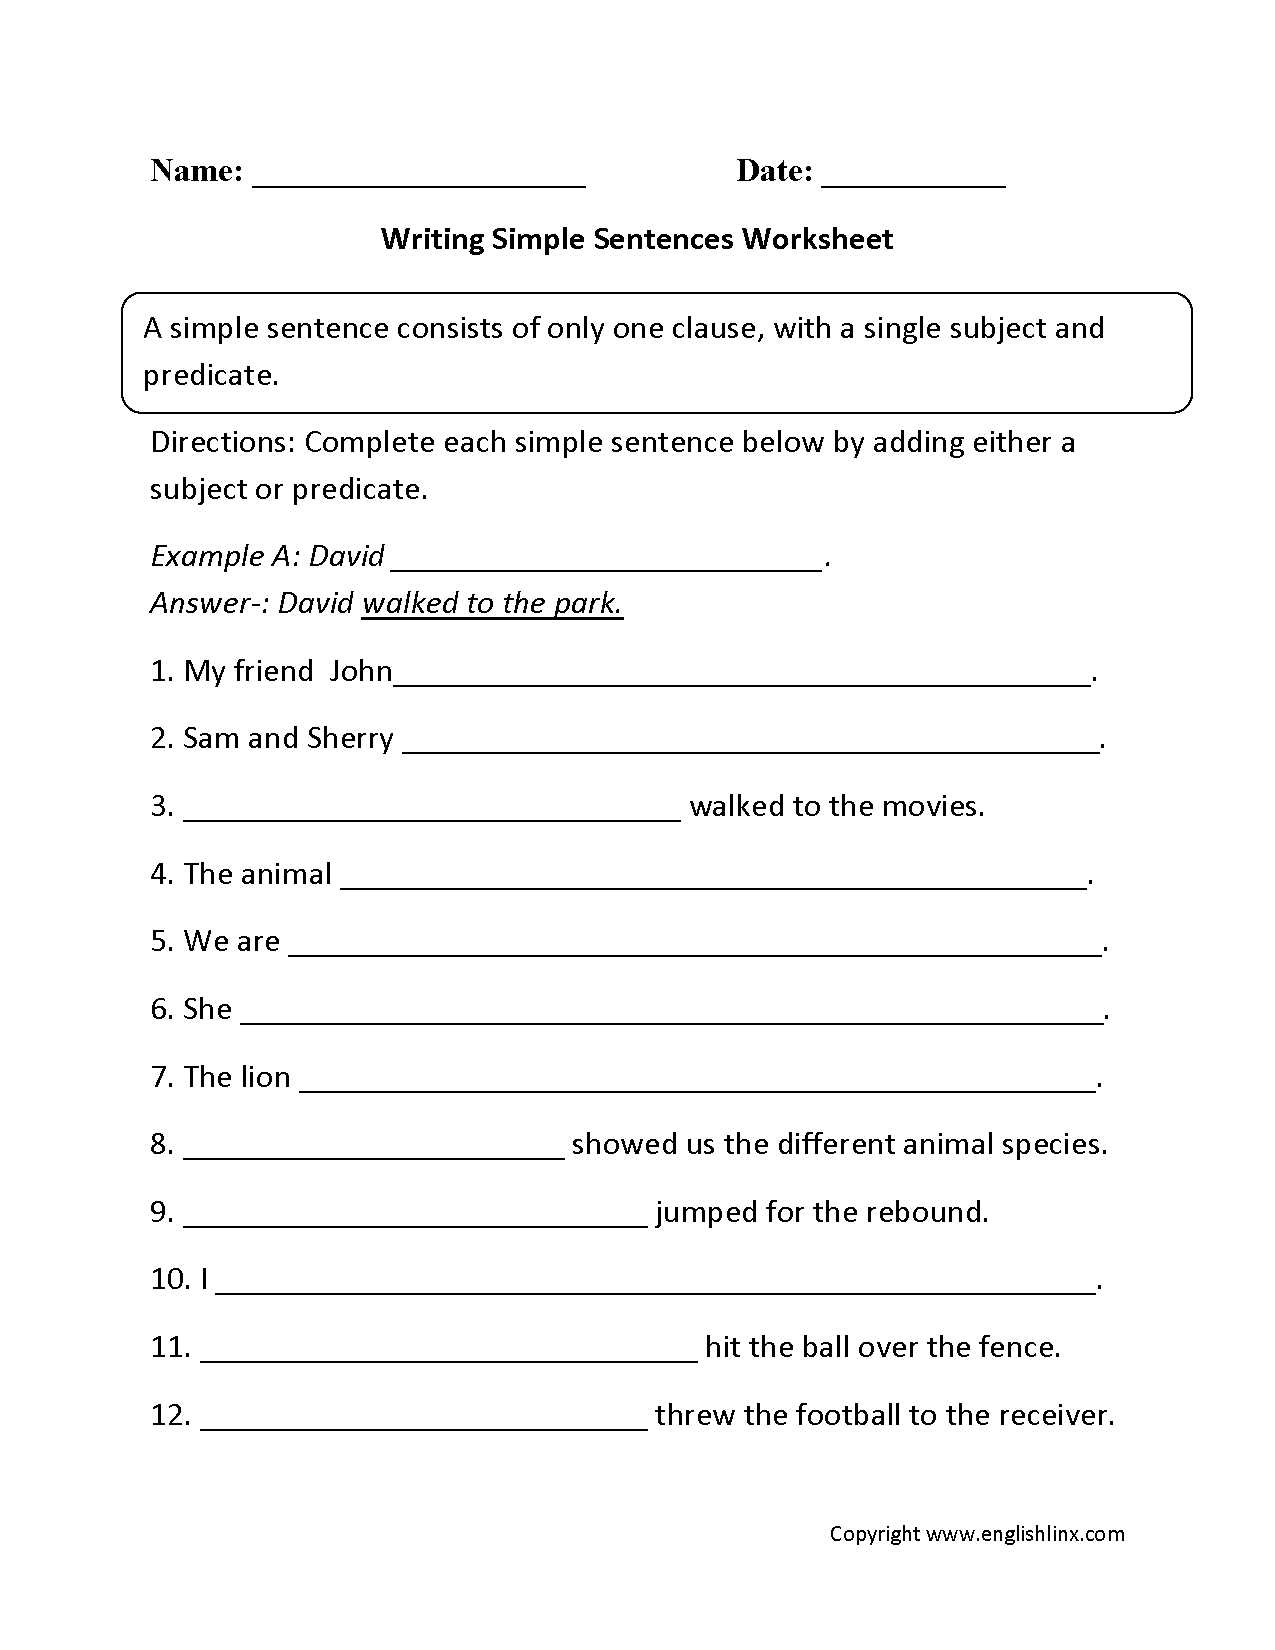 Free Sentence Scramble Worksheets and Collection Of Free Printable Writing Sentences Worksheets for